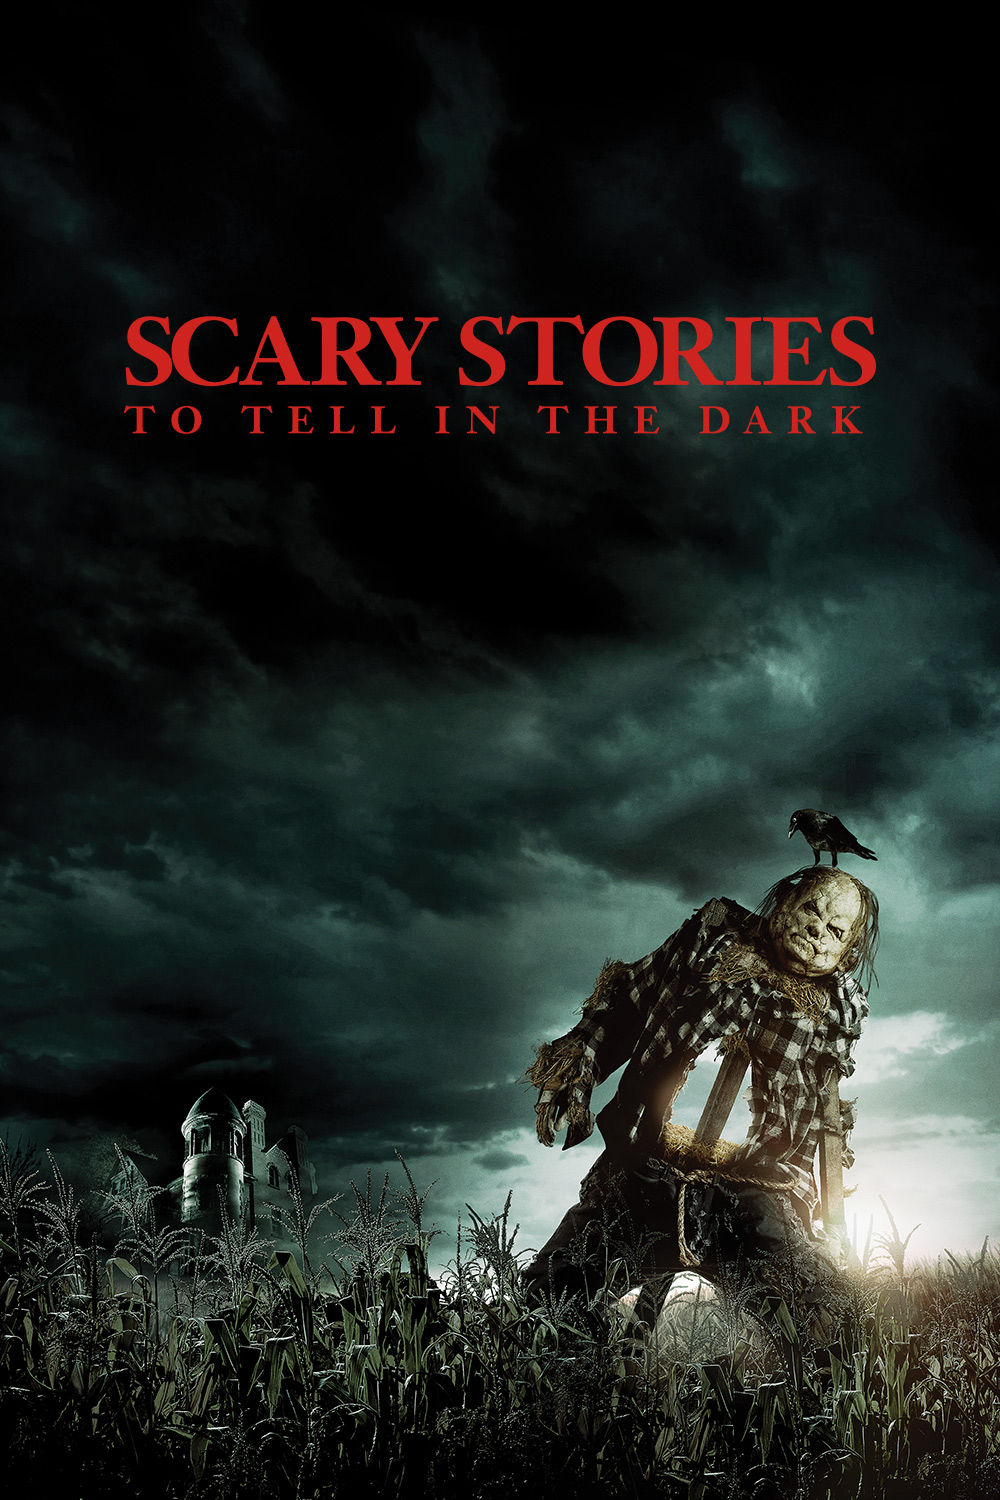 Watch Scary Stories to Tell in the Dark Online